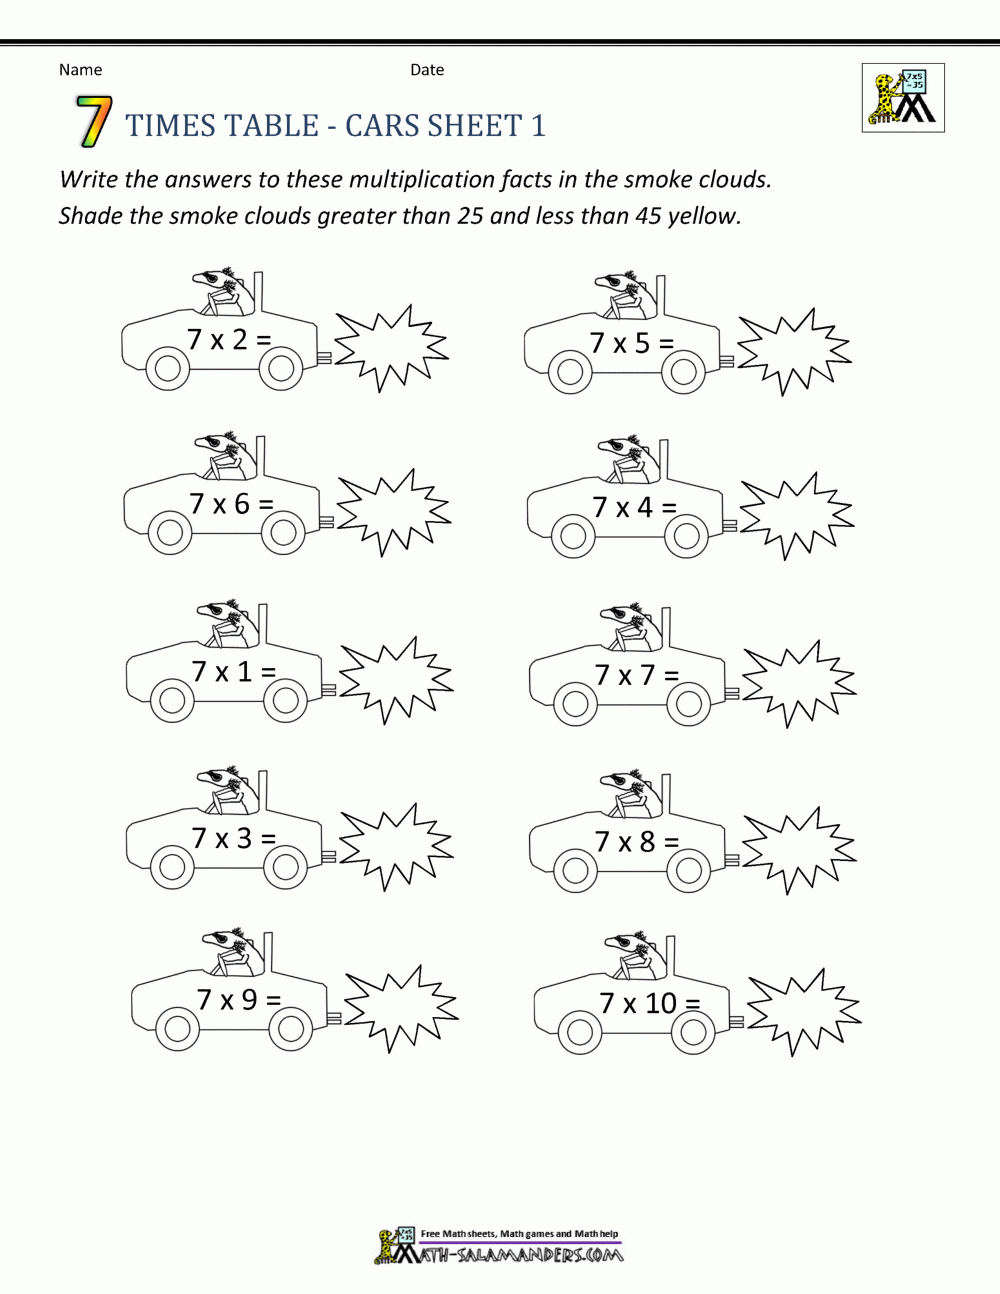 Free Times Table Worksheets - 7 Times Table for Multiplication Worksheets 7 Tables